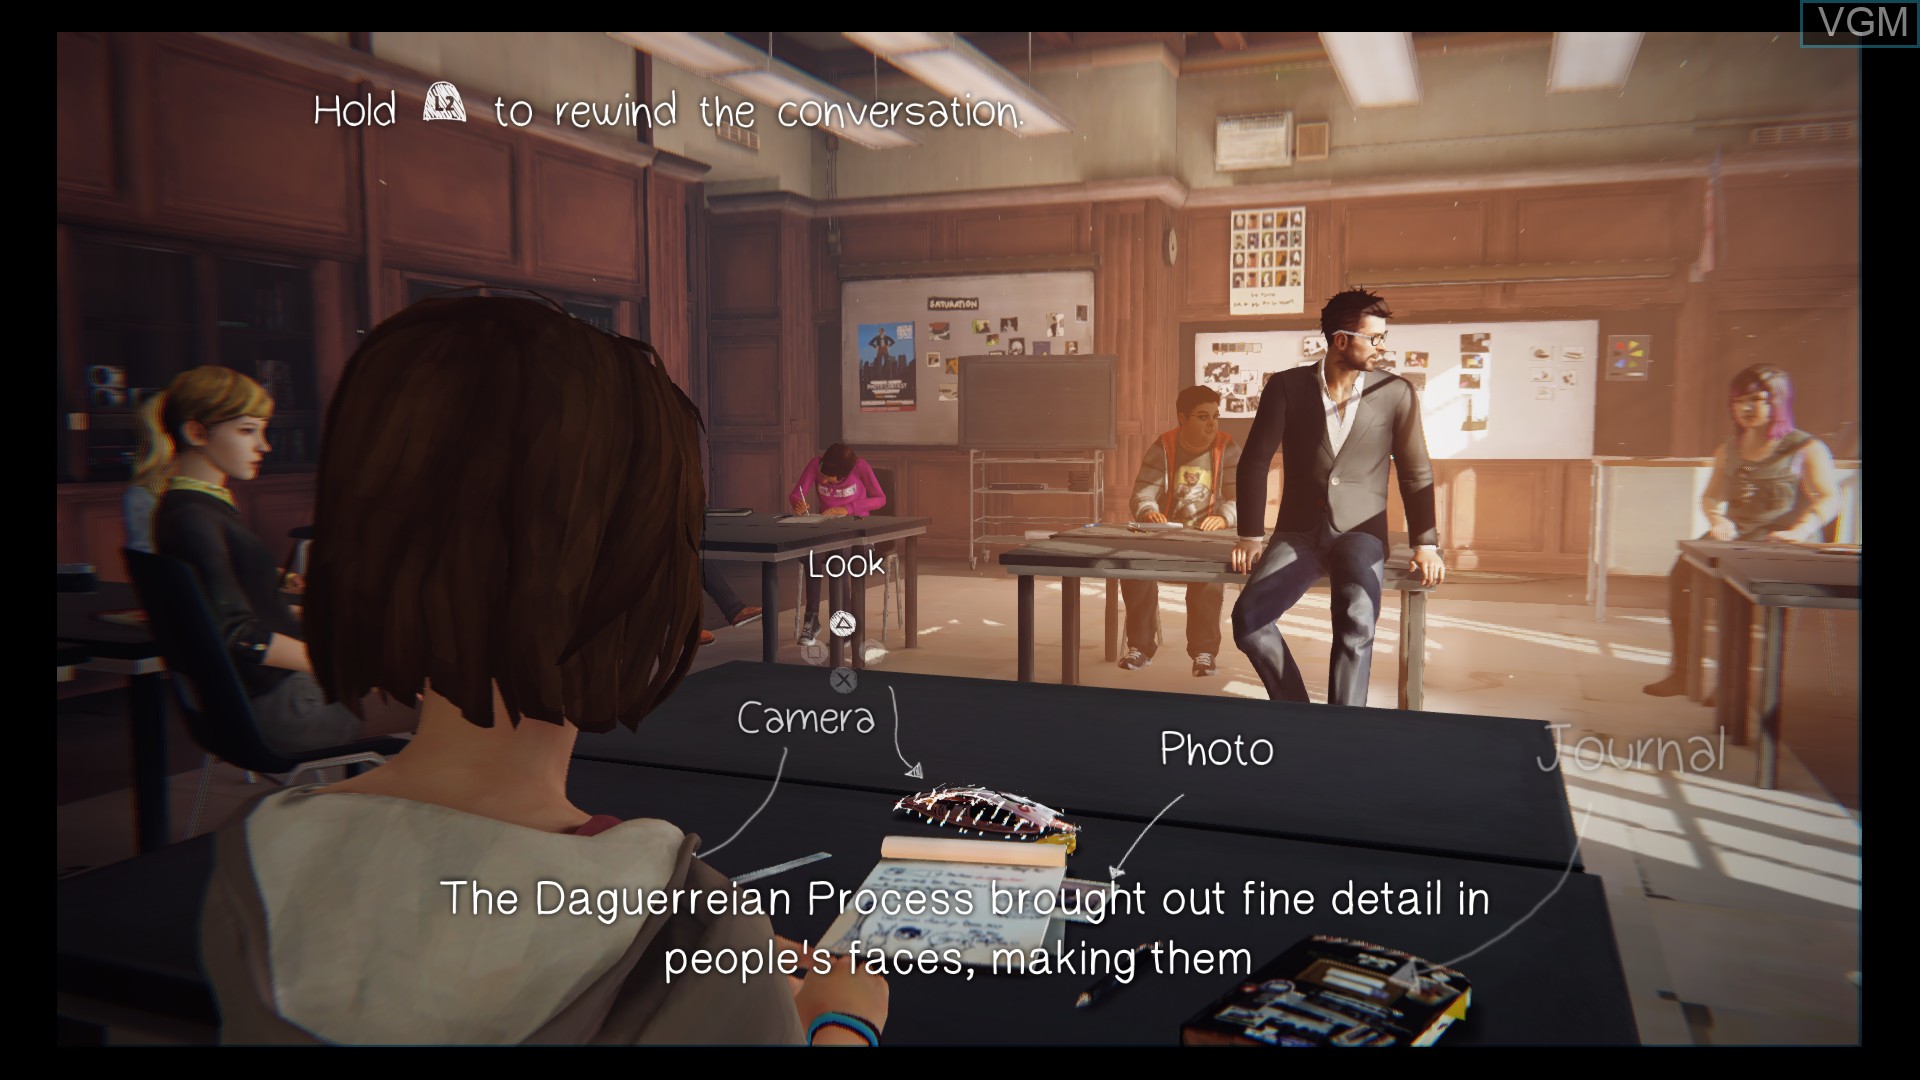 In-game screen of the game Life is Strange on Sony Playstation 4